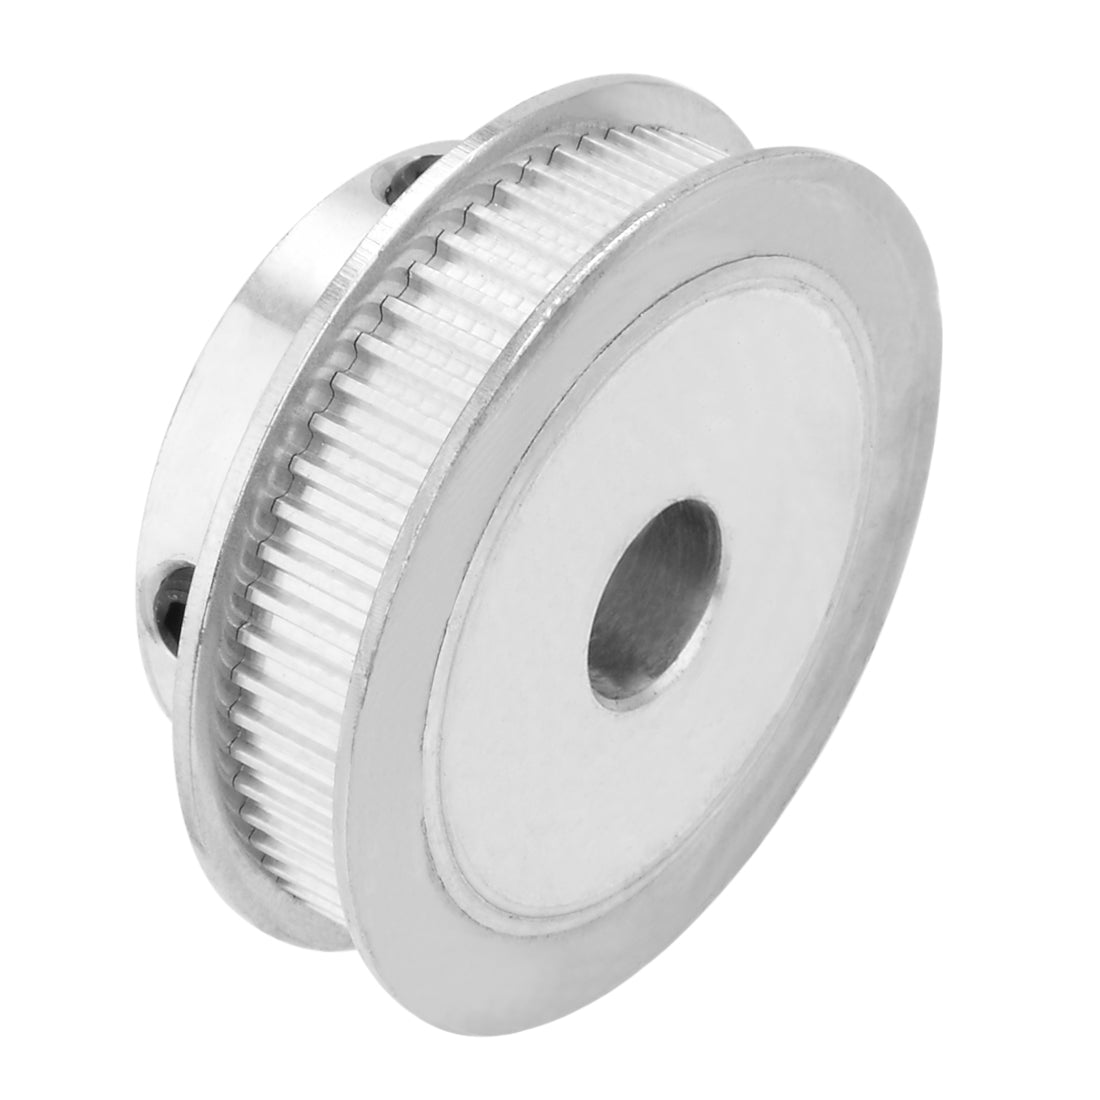 uxcell Uxcell Aluminum 60 Teeth 10mm Bore 2.032mm Pitch Timing Belt Pulley for 6mm Belt